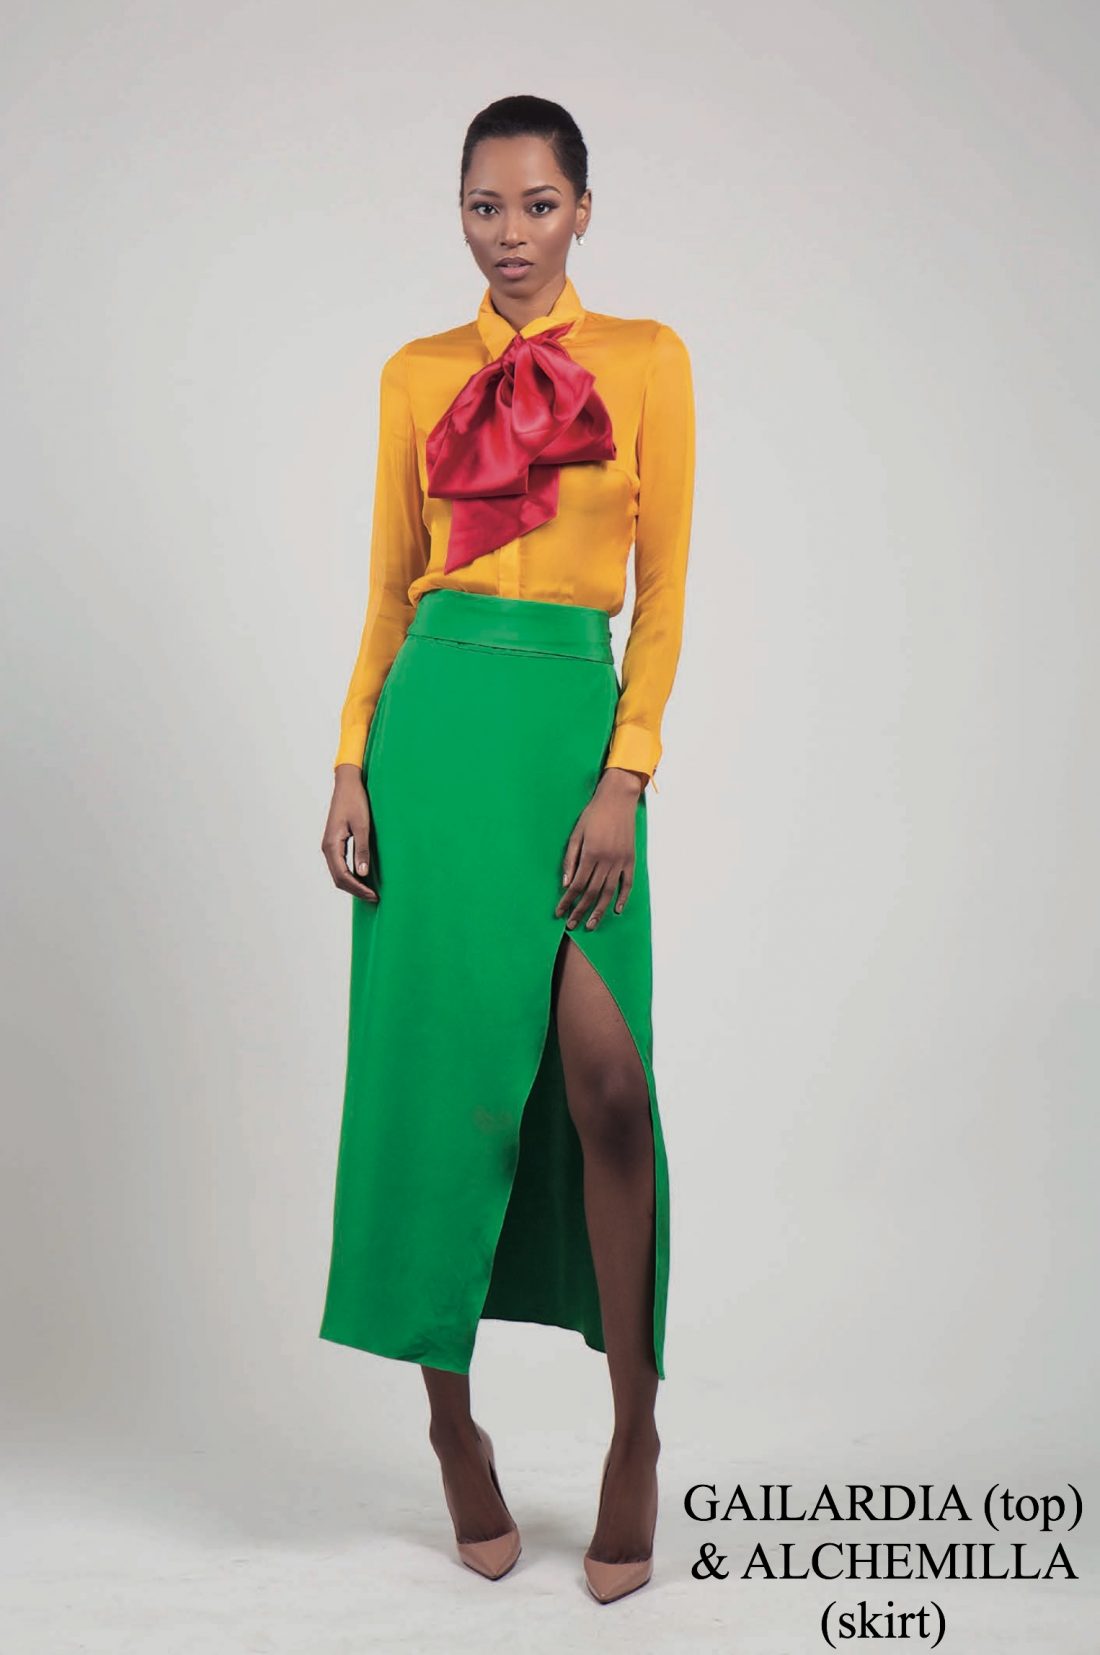 Vibrant hues, gorgeous separates: Introducing Raaah’s latest collection